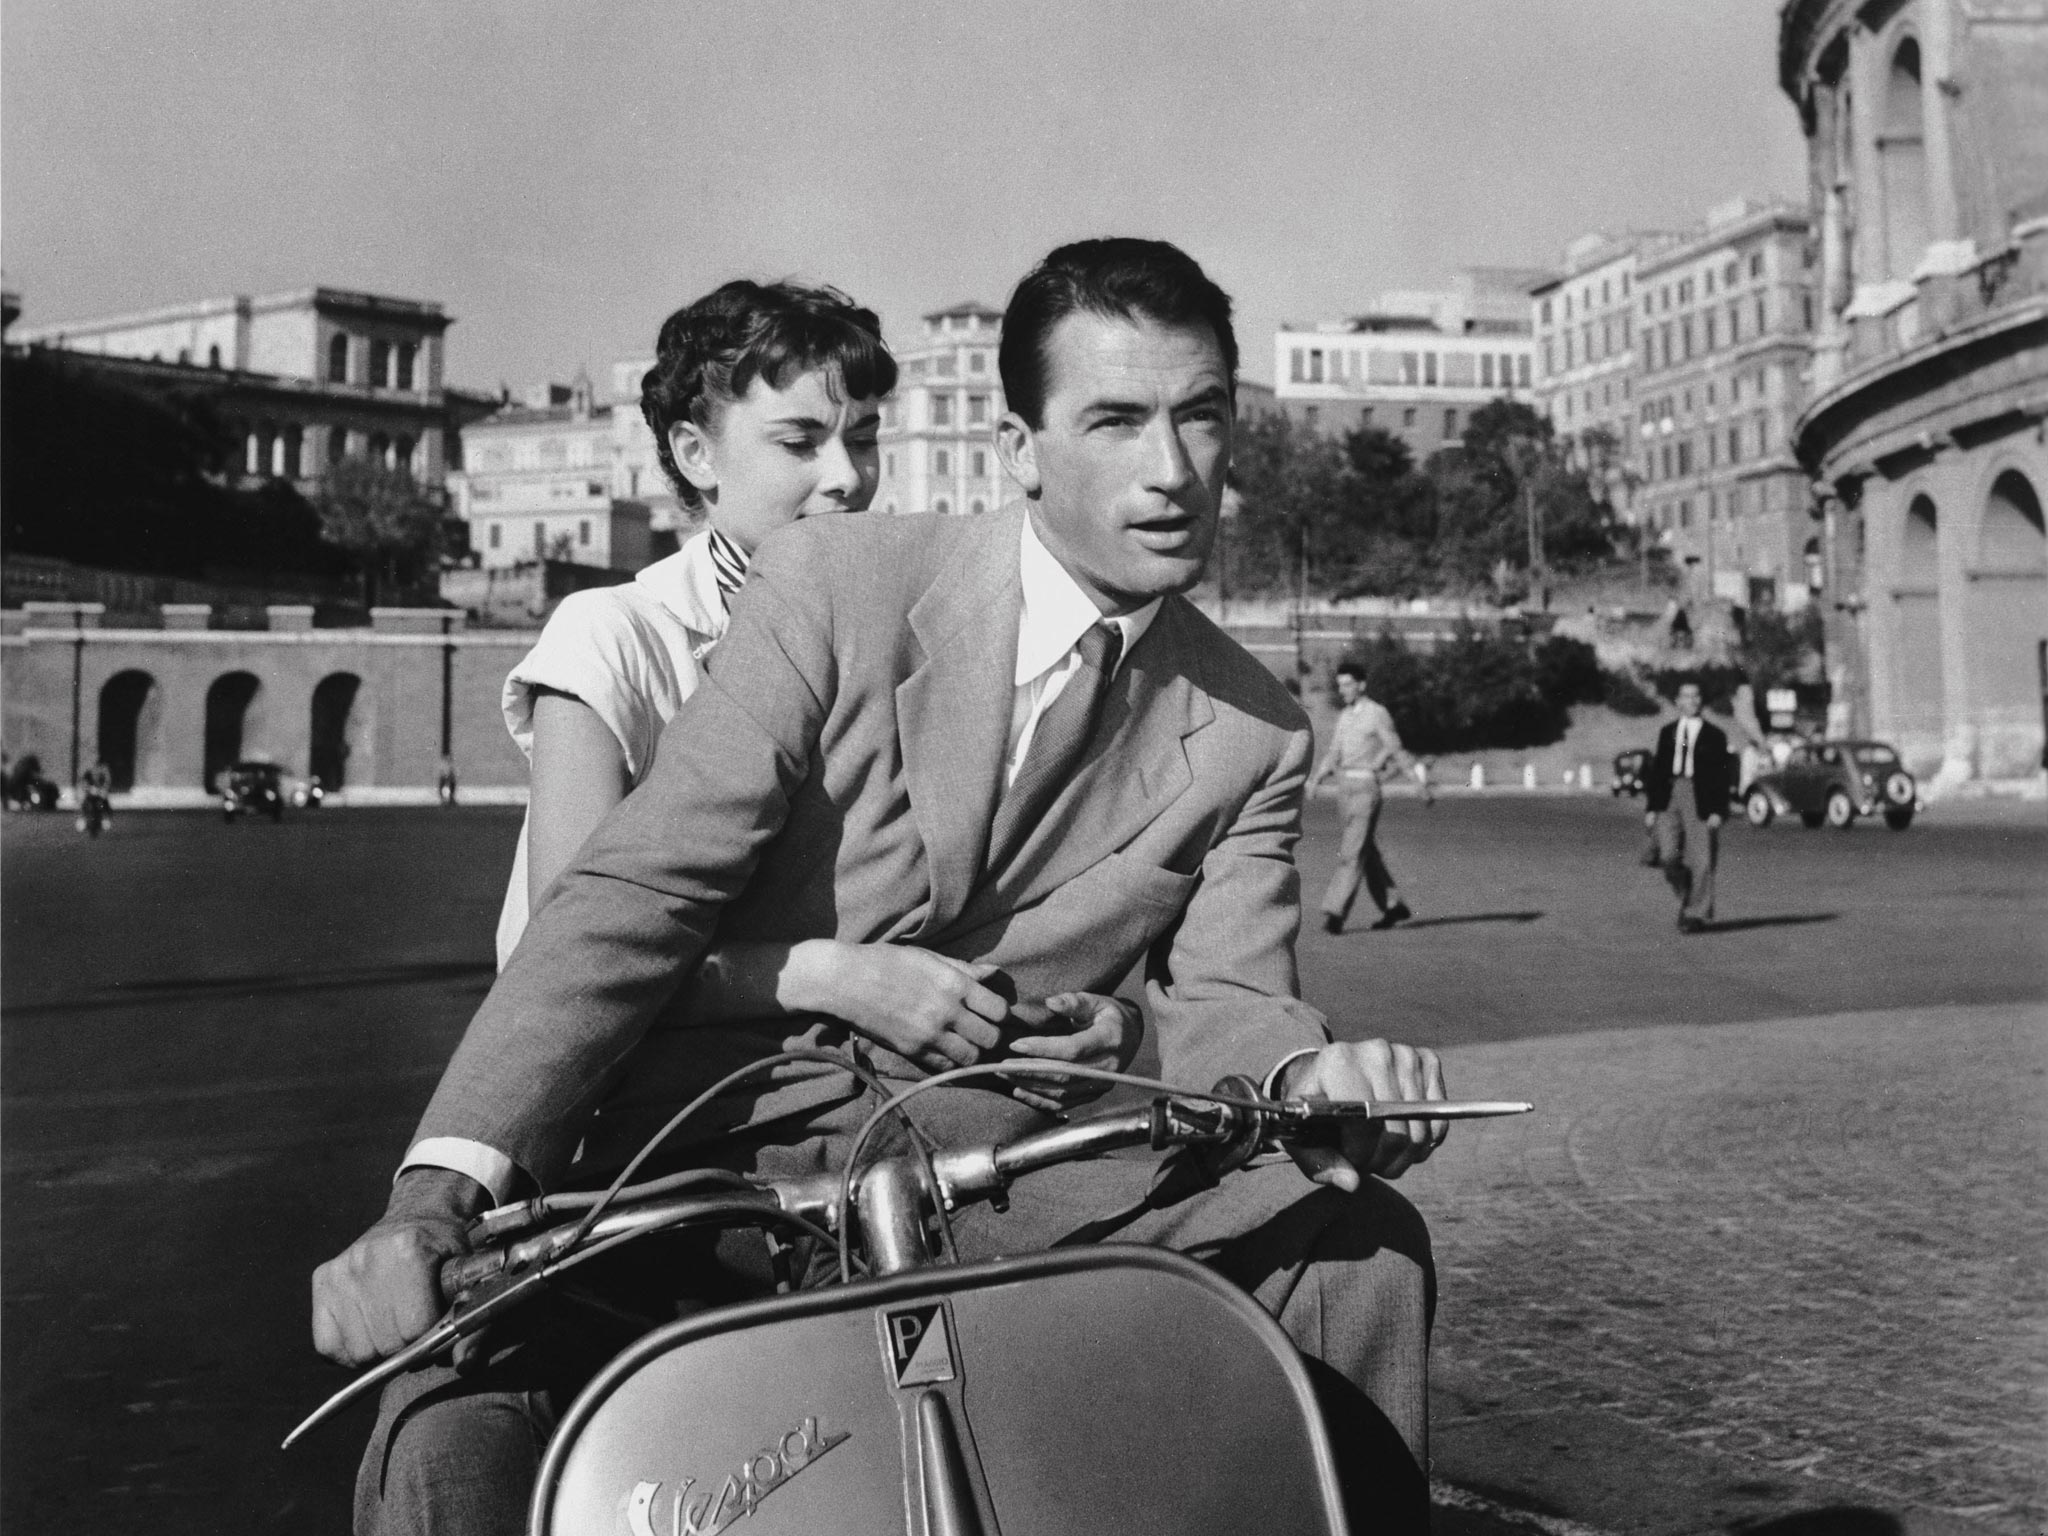 Audrey Hepburn and Gregory Peck in ‘Roman Holiday’ in 1953